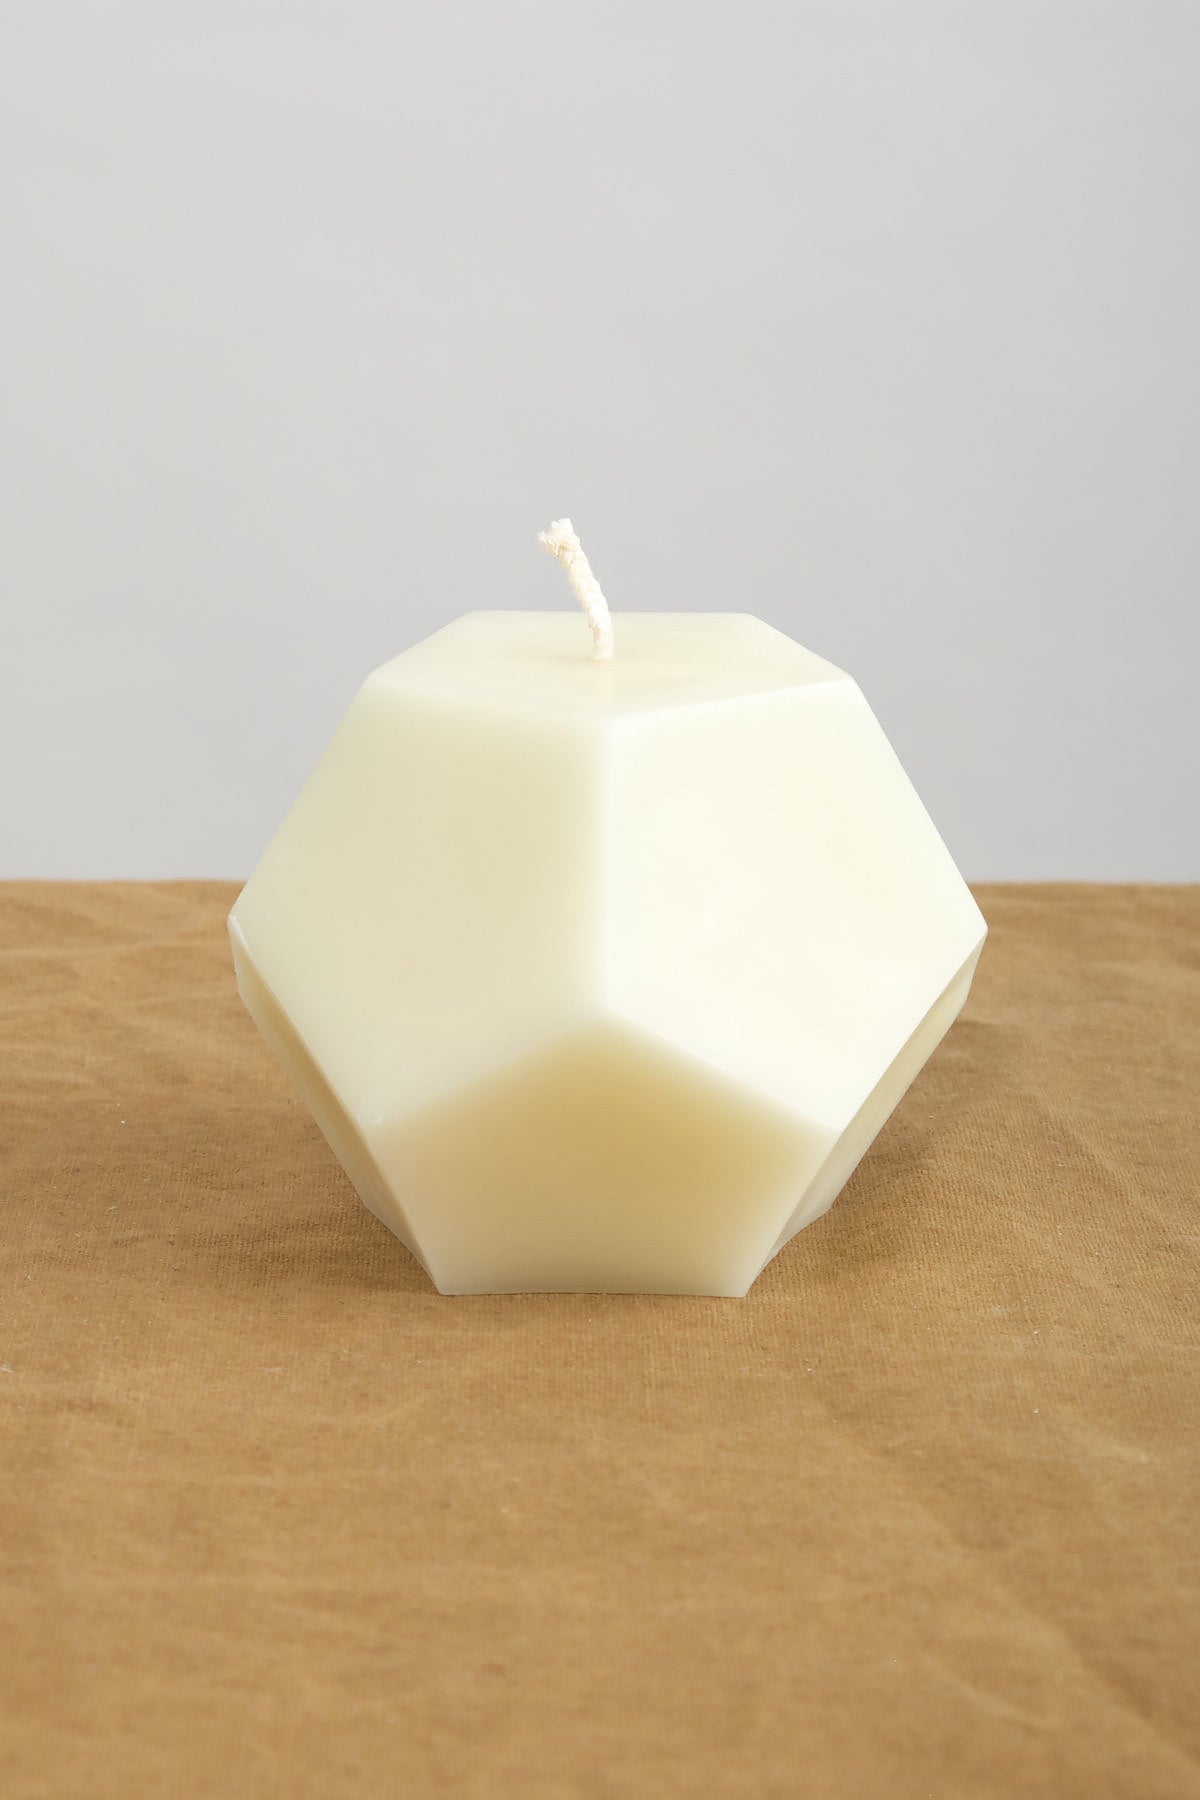 Greentree Dodecahedron Candle in Cream